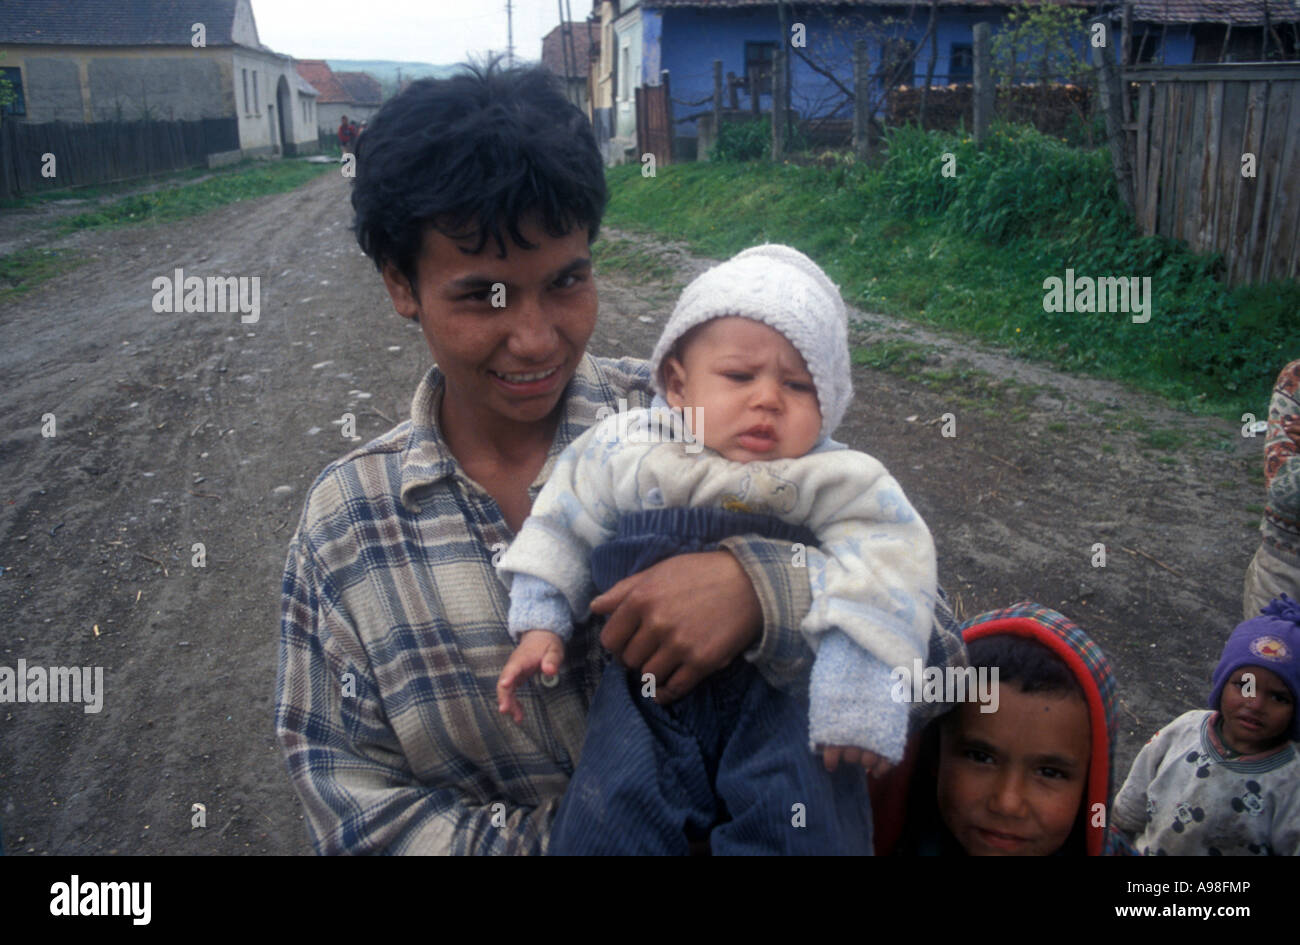 A Gypsy mother poses with a child as other children look on in Soard, Romania.  Note dirt street and small houses in background. Stock Photo